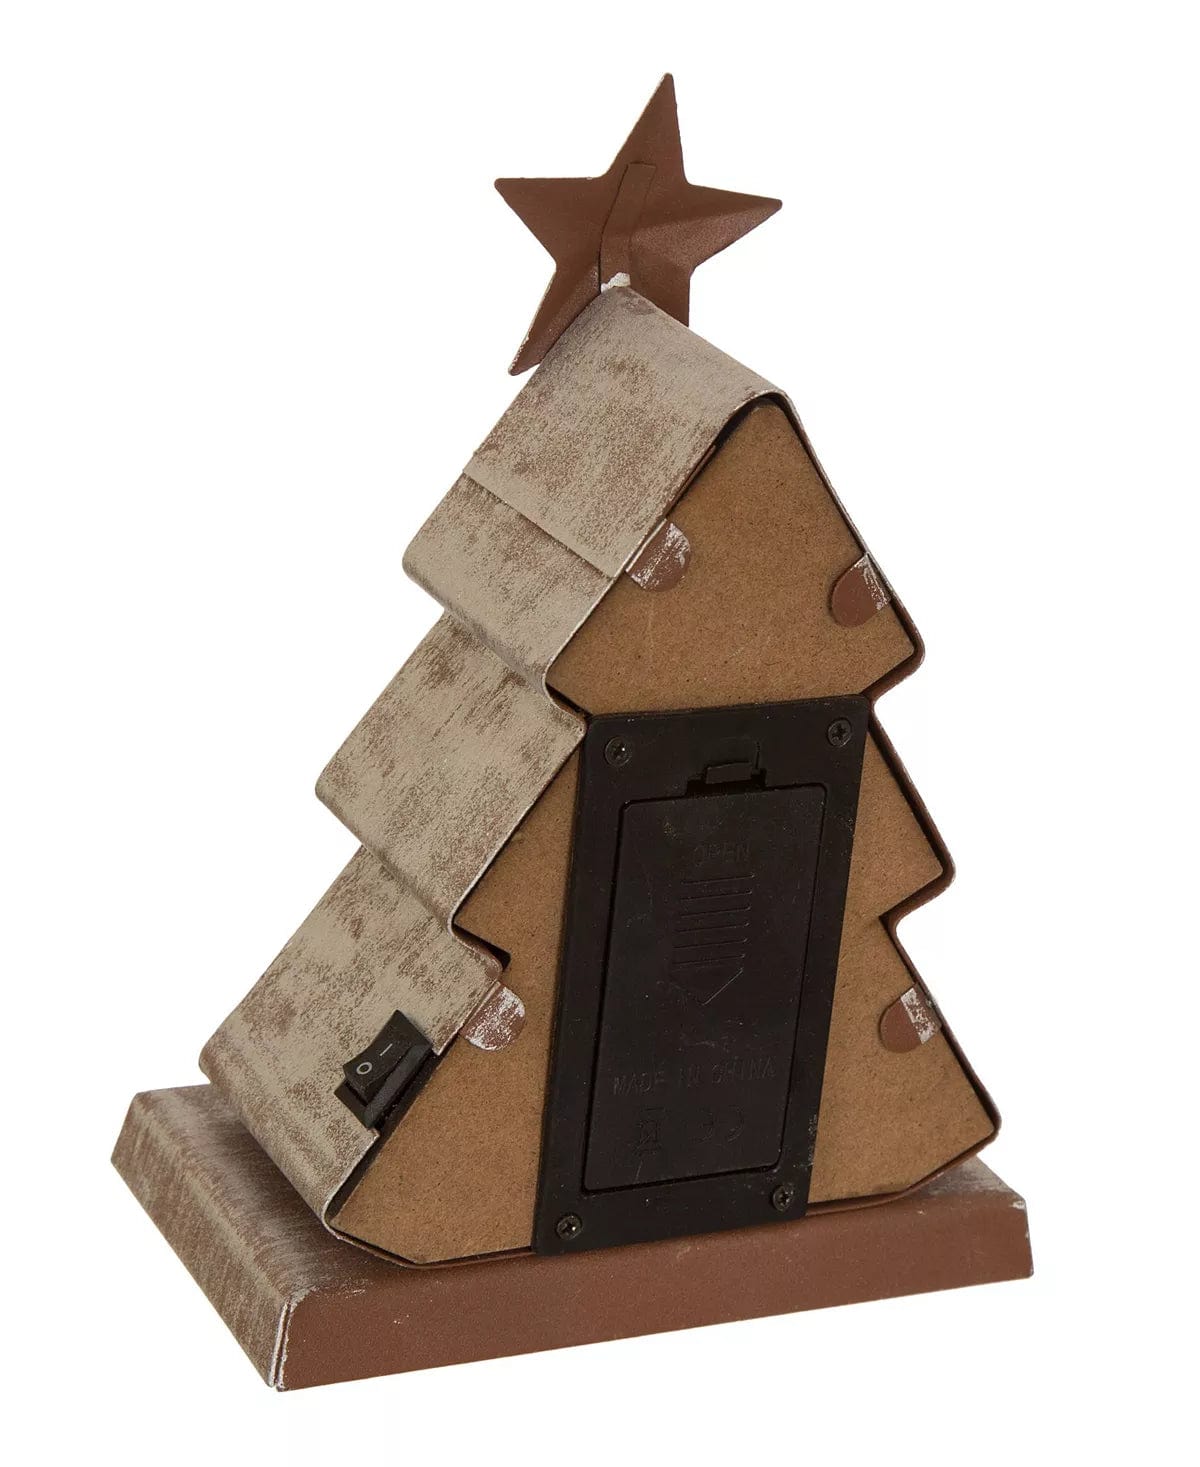 7.50" H Marquee LED Wooden Christmas Tree Stocking Holder